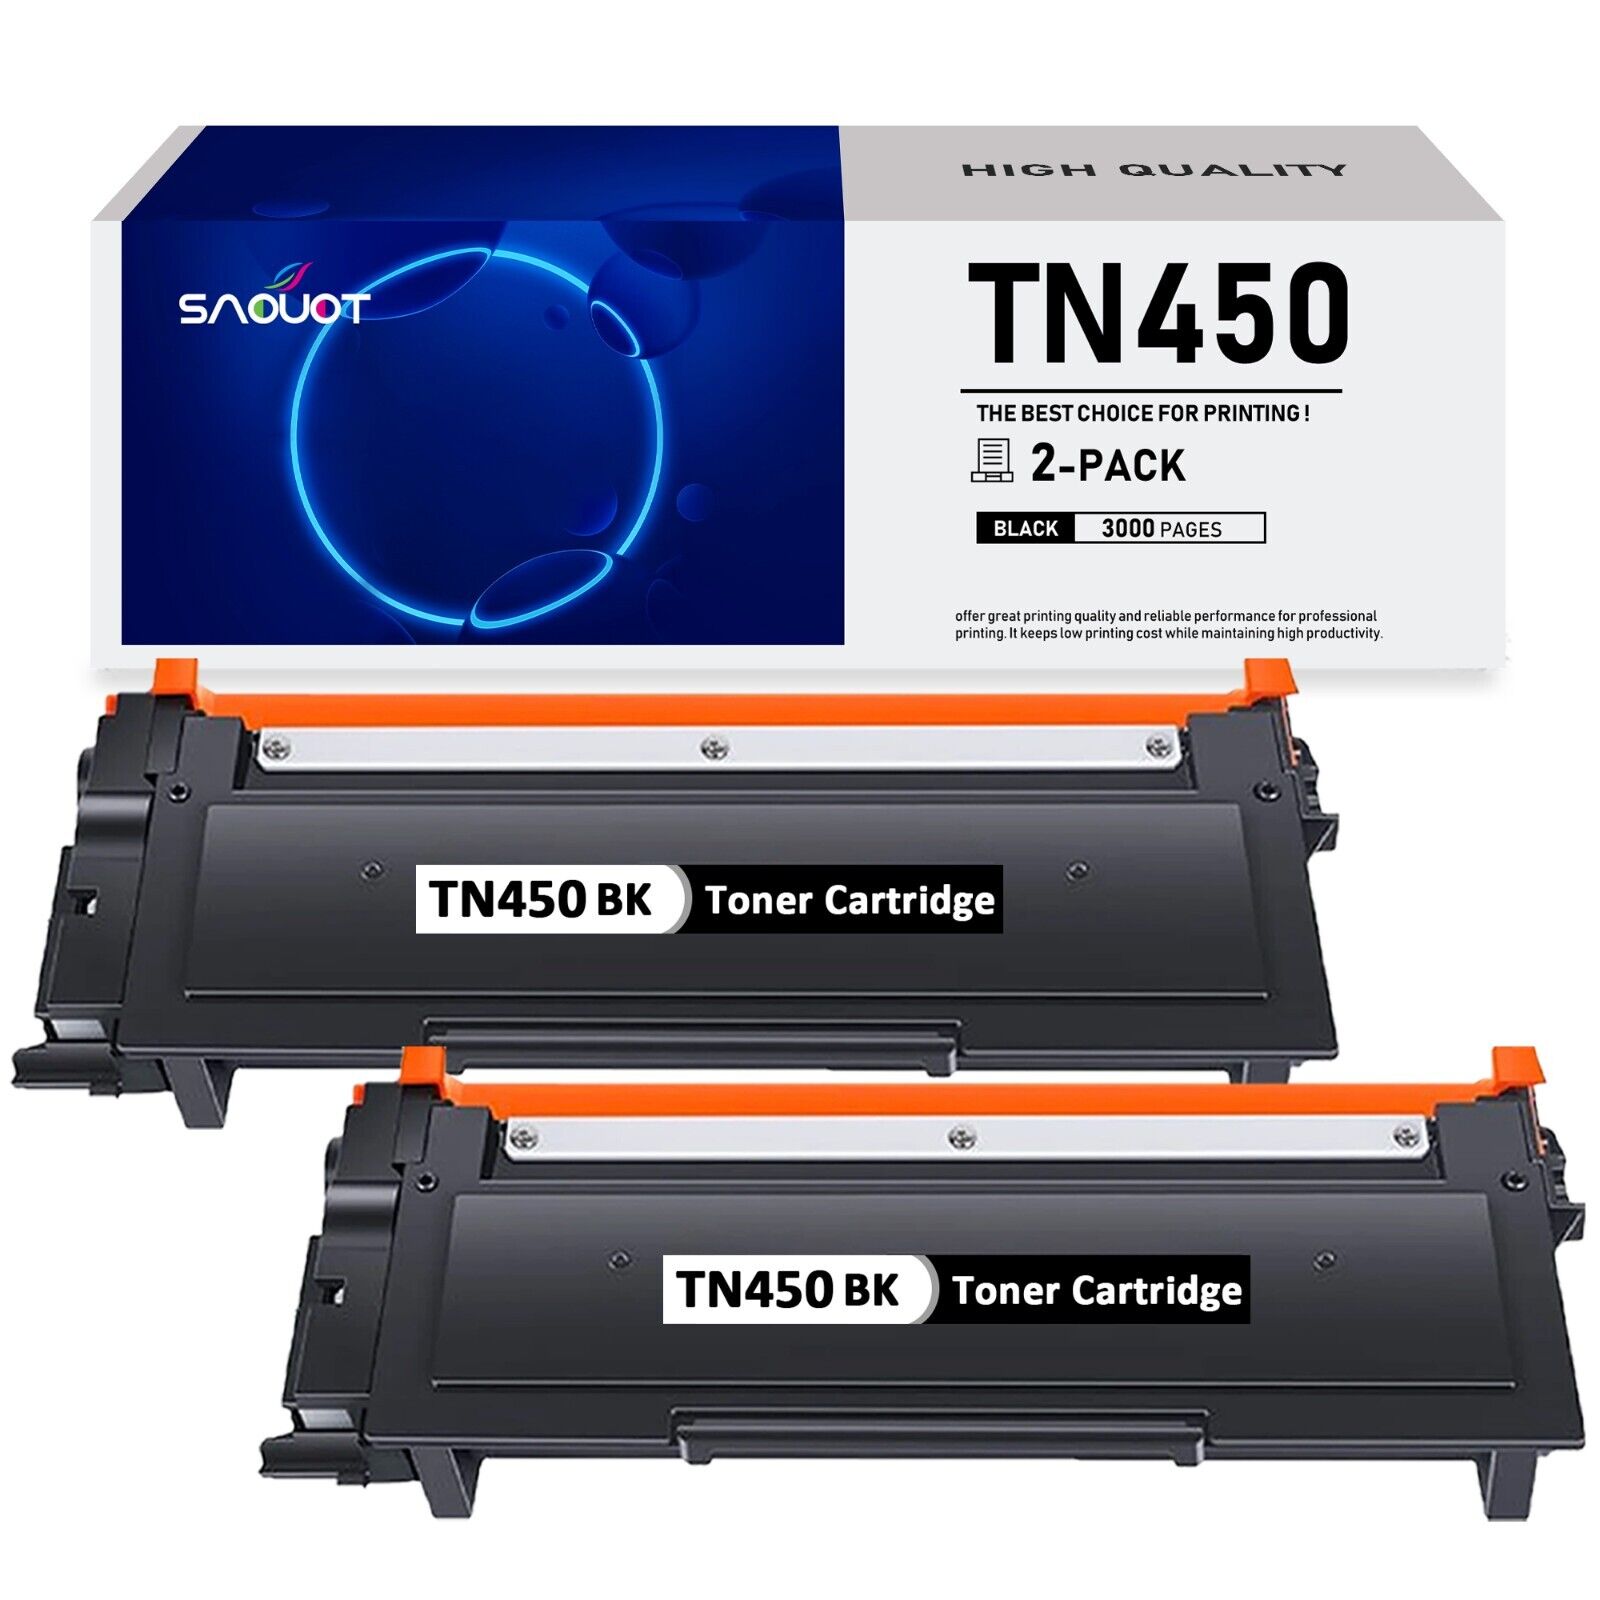 TN450 Toner Cartridge Replacement for Brother HL-2230 2240 2250DN 2270DW 2280DW